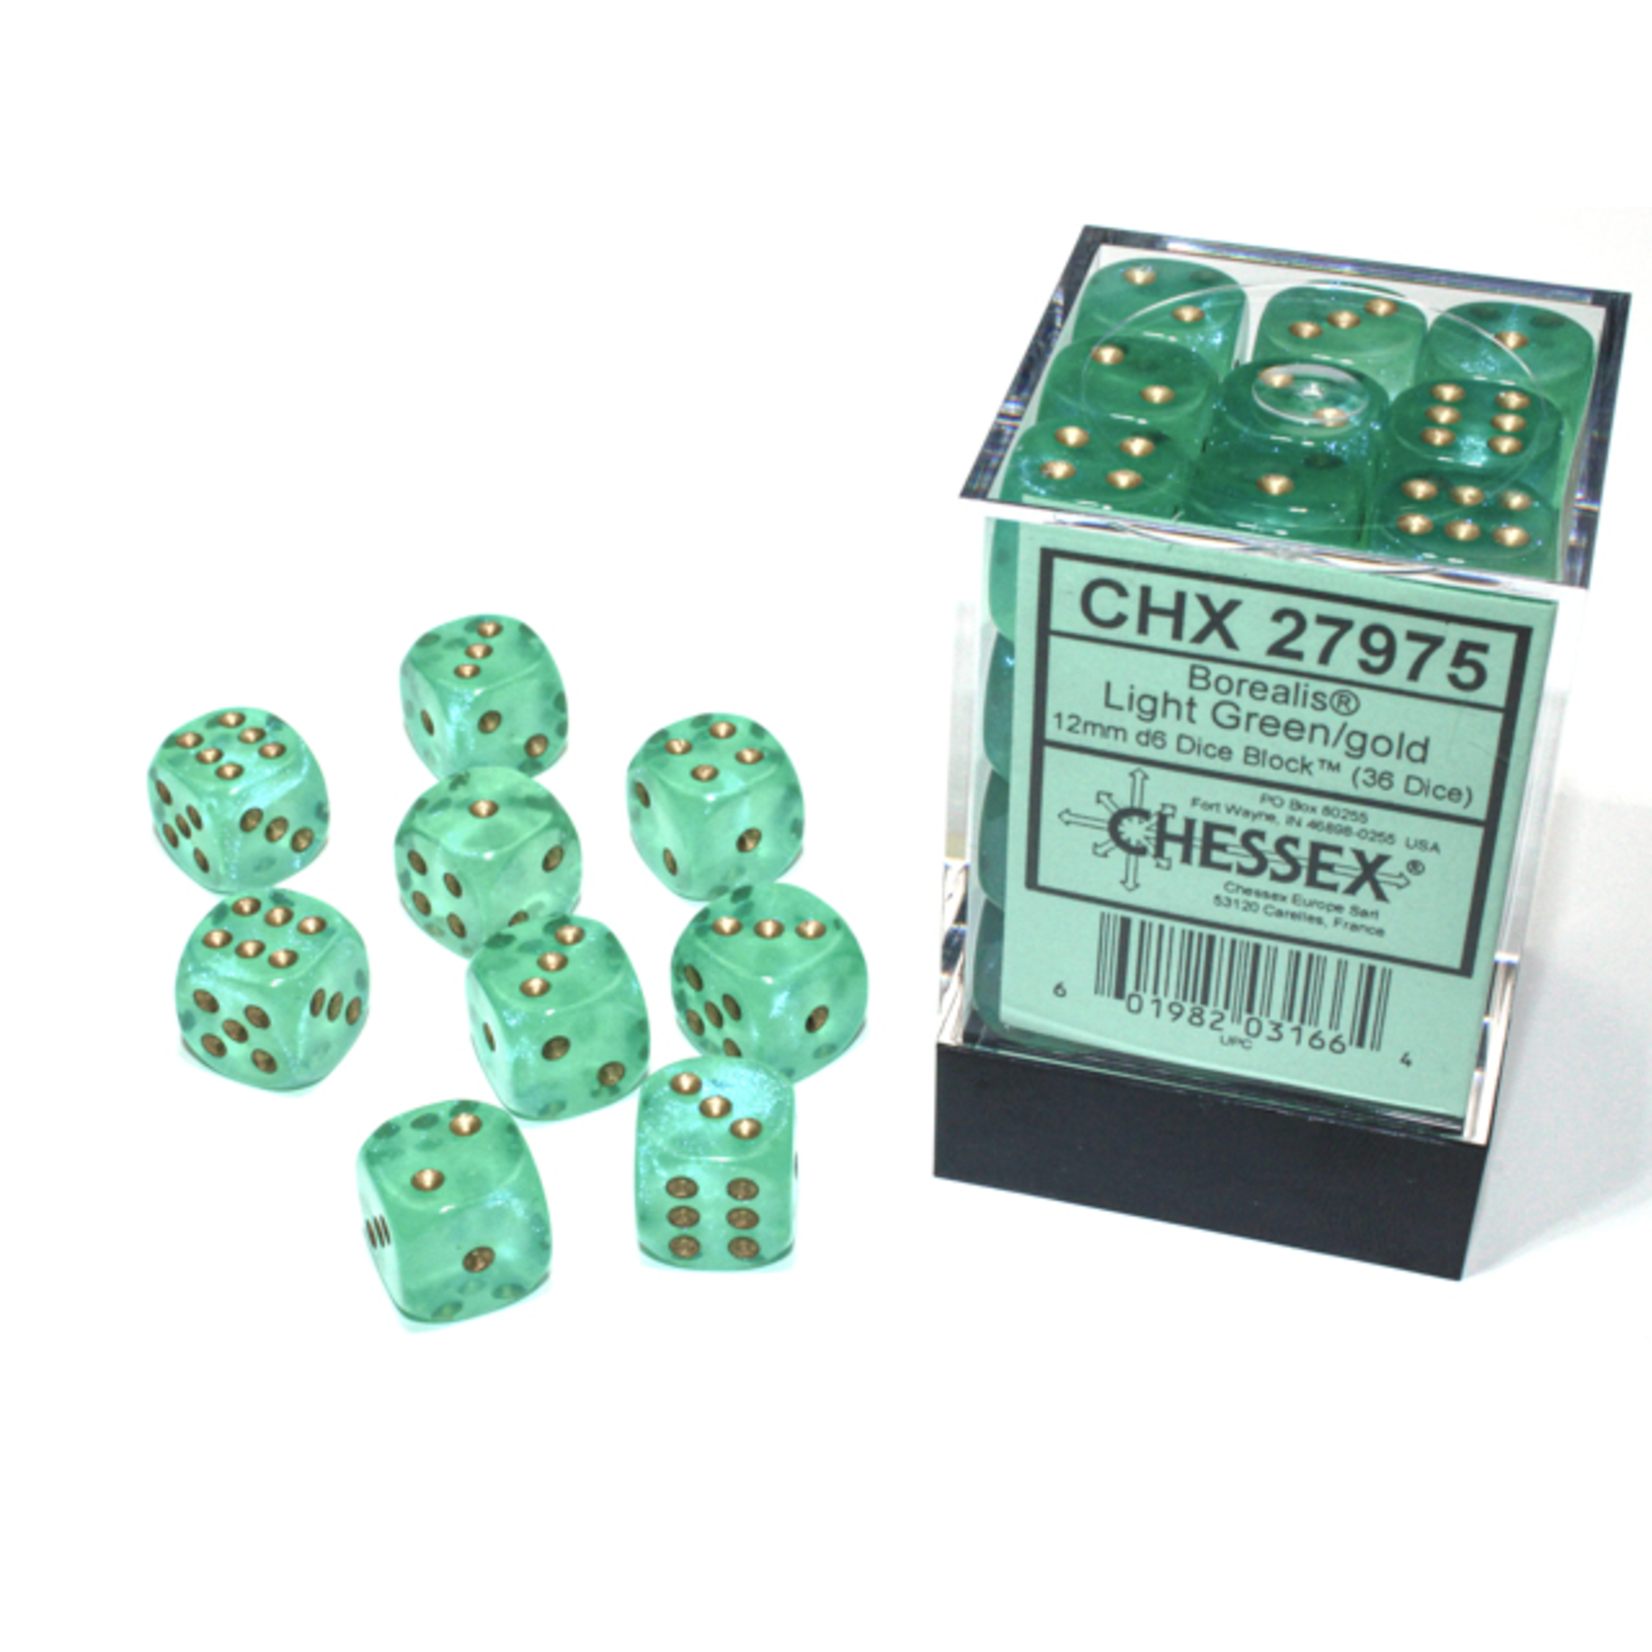 Chessex 36-Piece Dice Set: Borealis Luminary Light Green with Gold Pips (12mm, D6s Only)